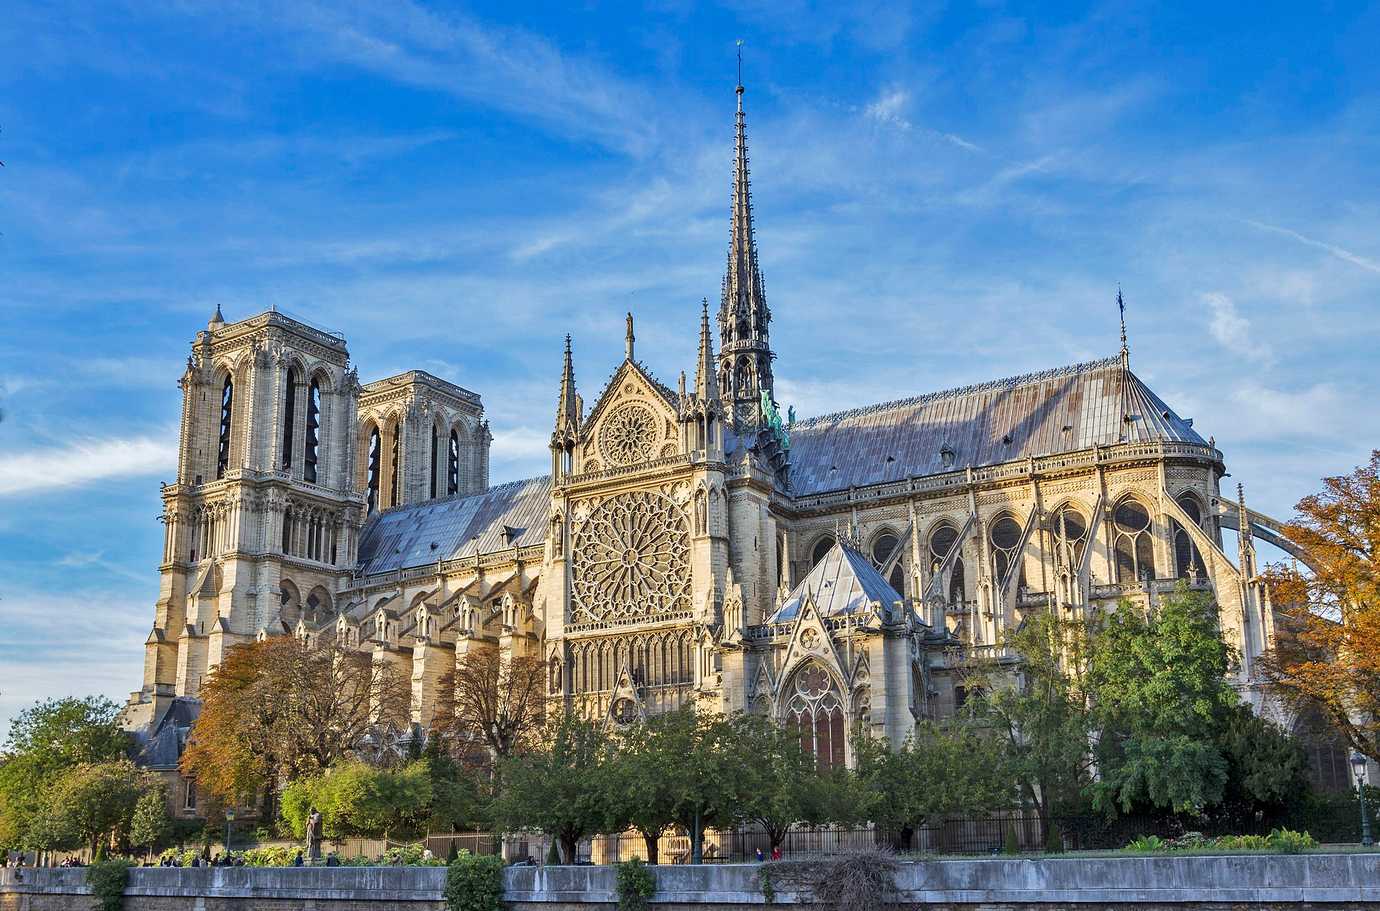 Notre Dame (image by Wikipedia)